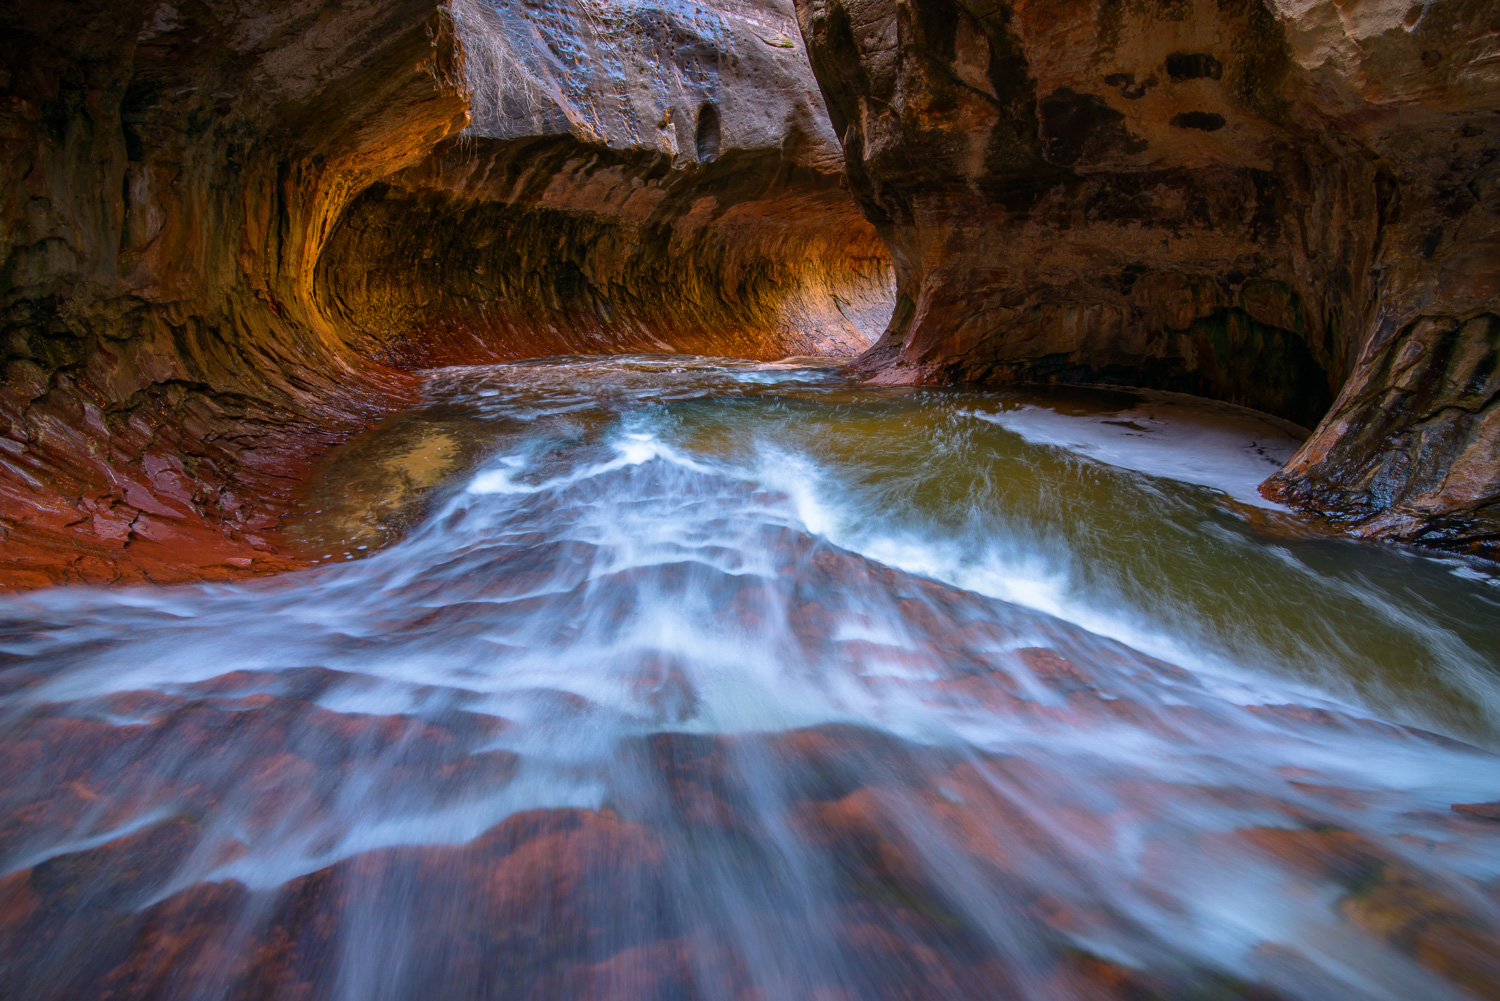 Spring flow in the Subway (slot canyon) along Left Fork of North Creek deep in the backcountry of Zion National Park, Utah.